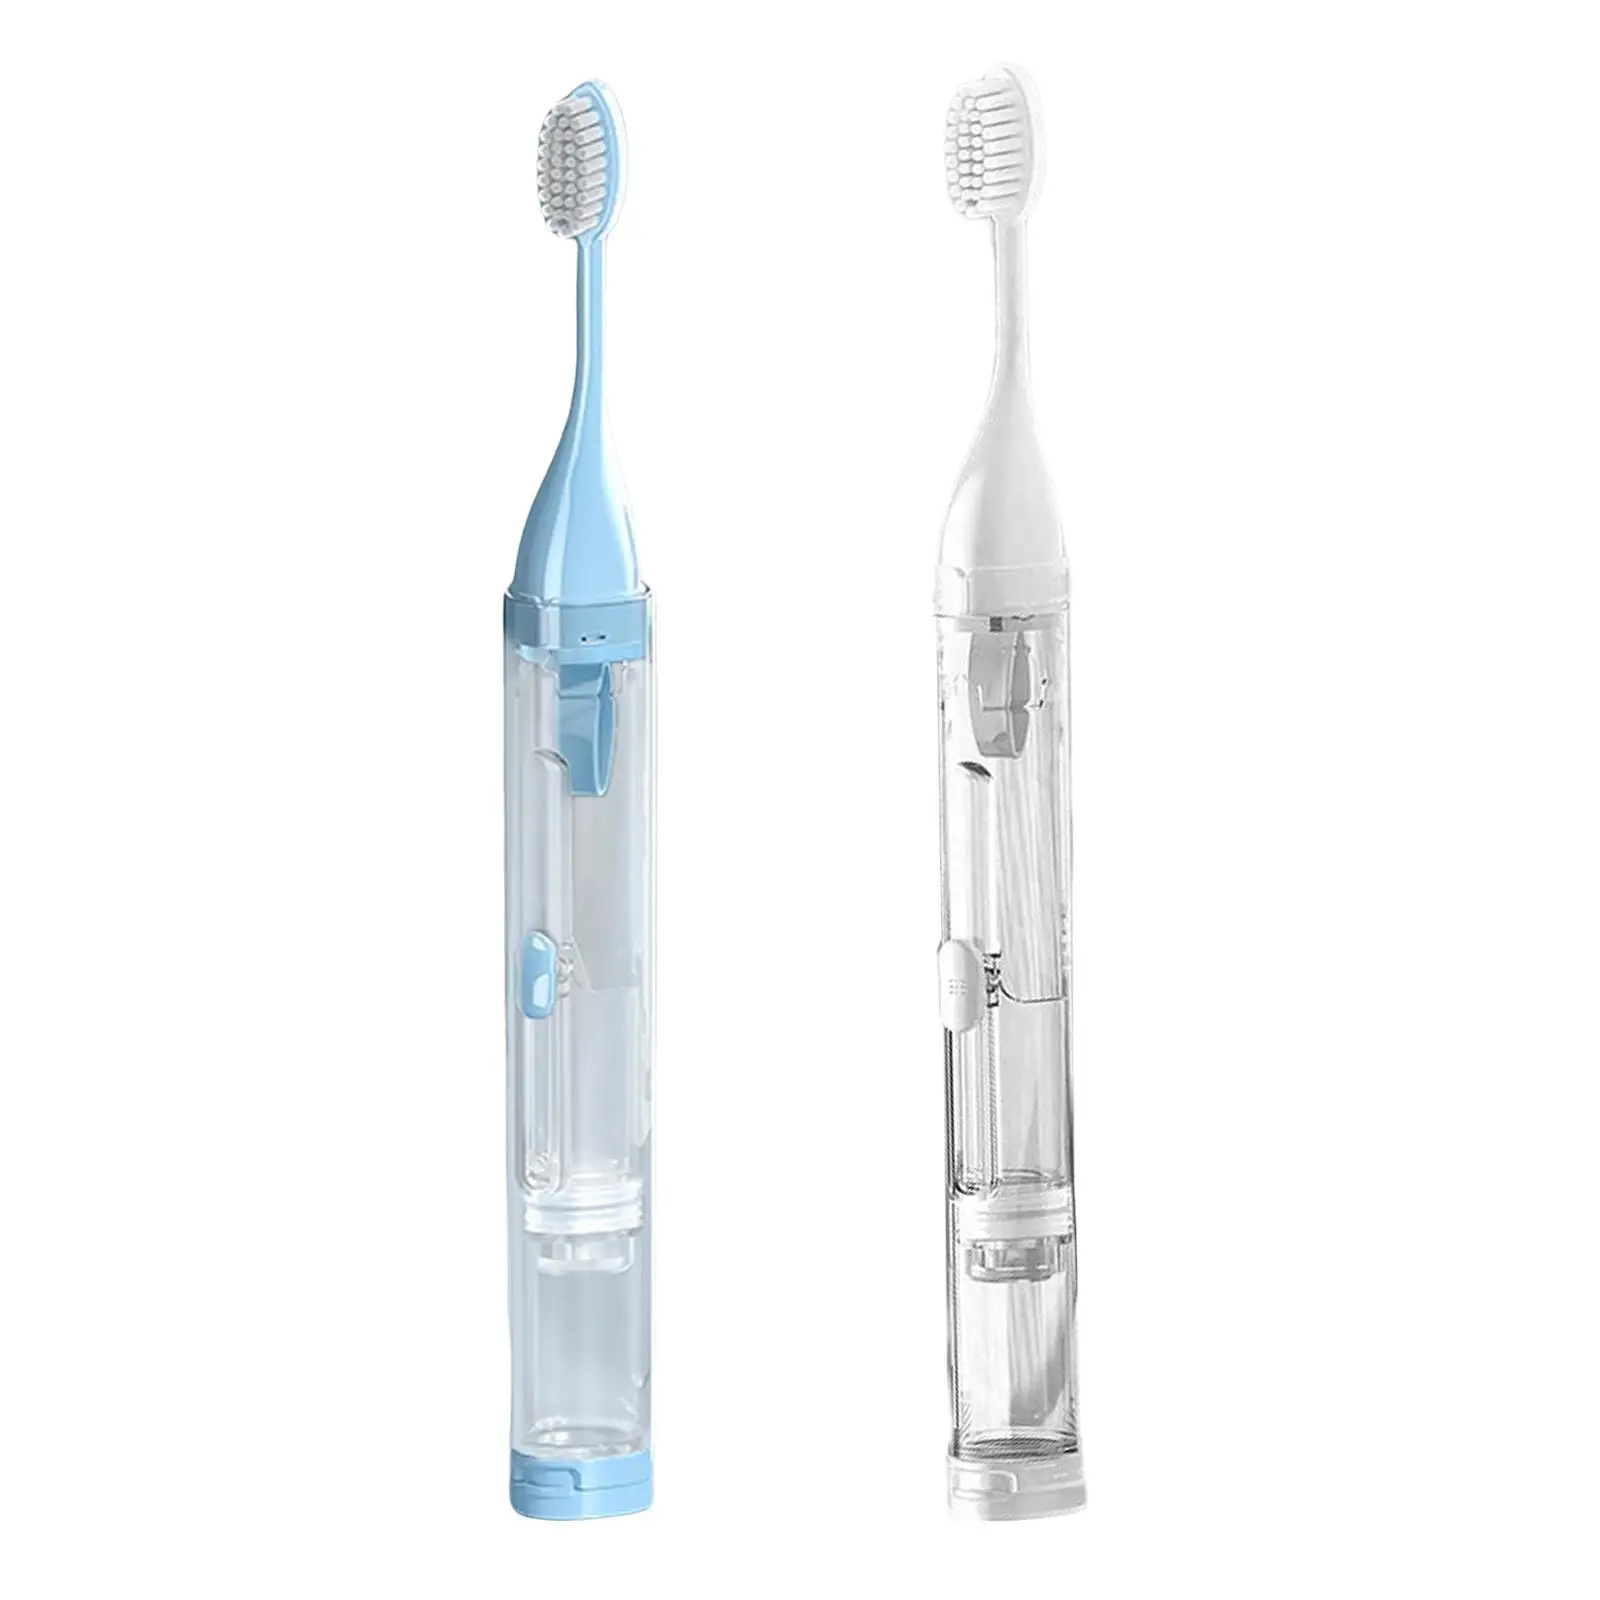 Portable Travel Toothbrush Set Oral Hygiene Soft Bristle Folding Toothbrush for Holidays Camping Backpacking Brush Box Holder